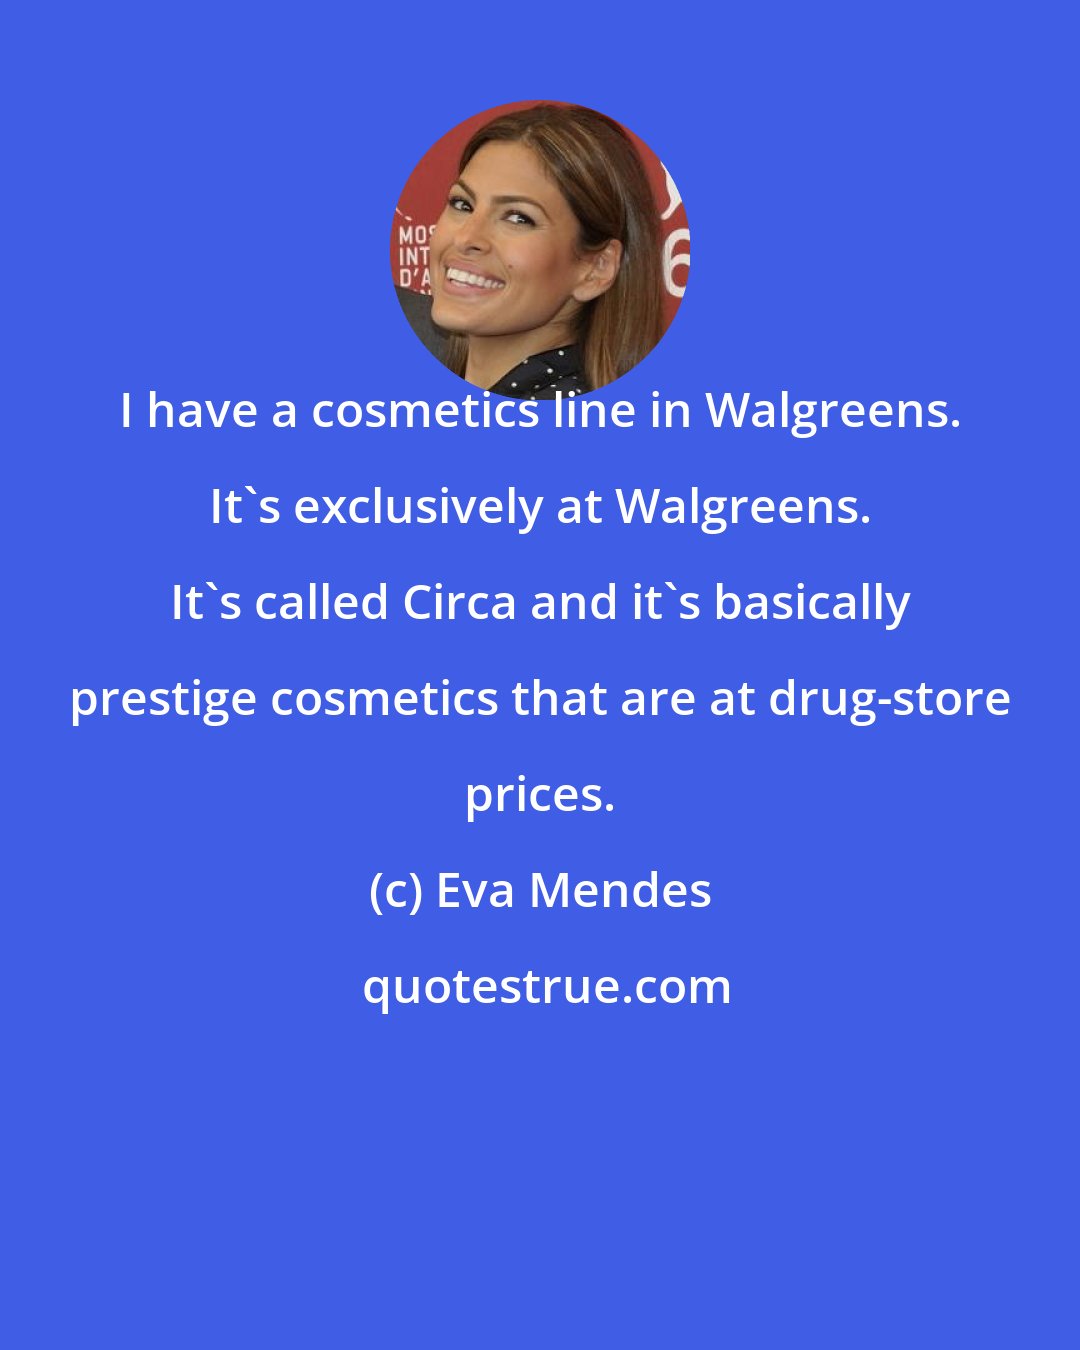 Eva Mendes: I have a cosmetics line in Walgreens. It's exclusively at Walgreens. It's called Circa and it's basically prestige cosmetics that are at drug-store prices.